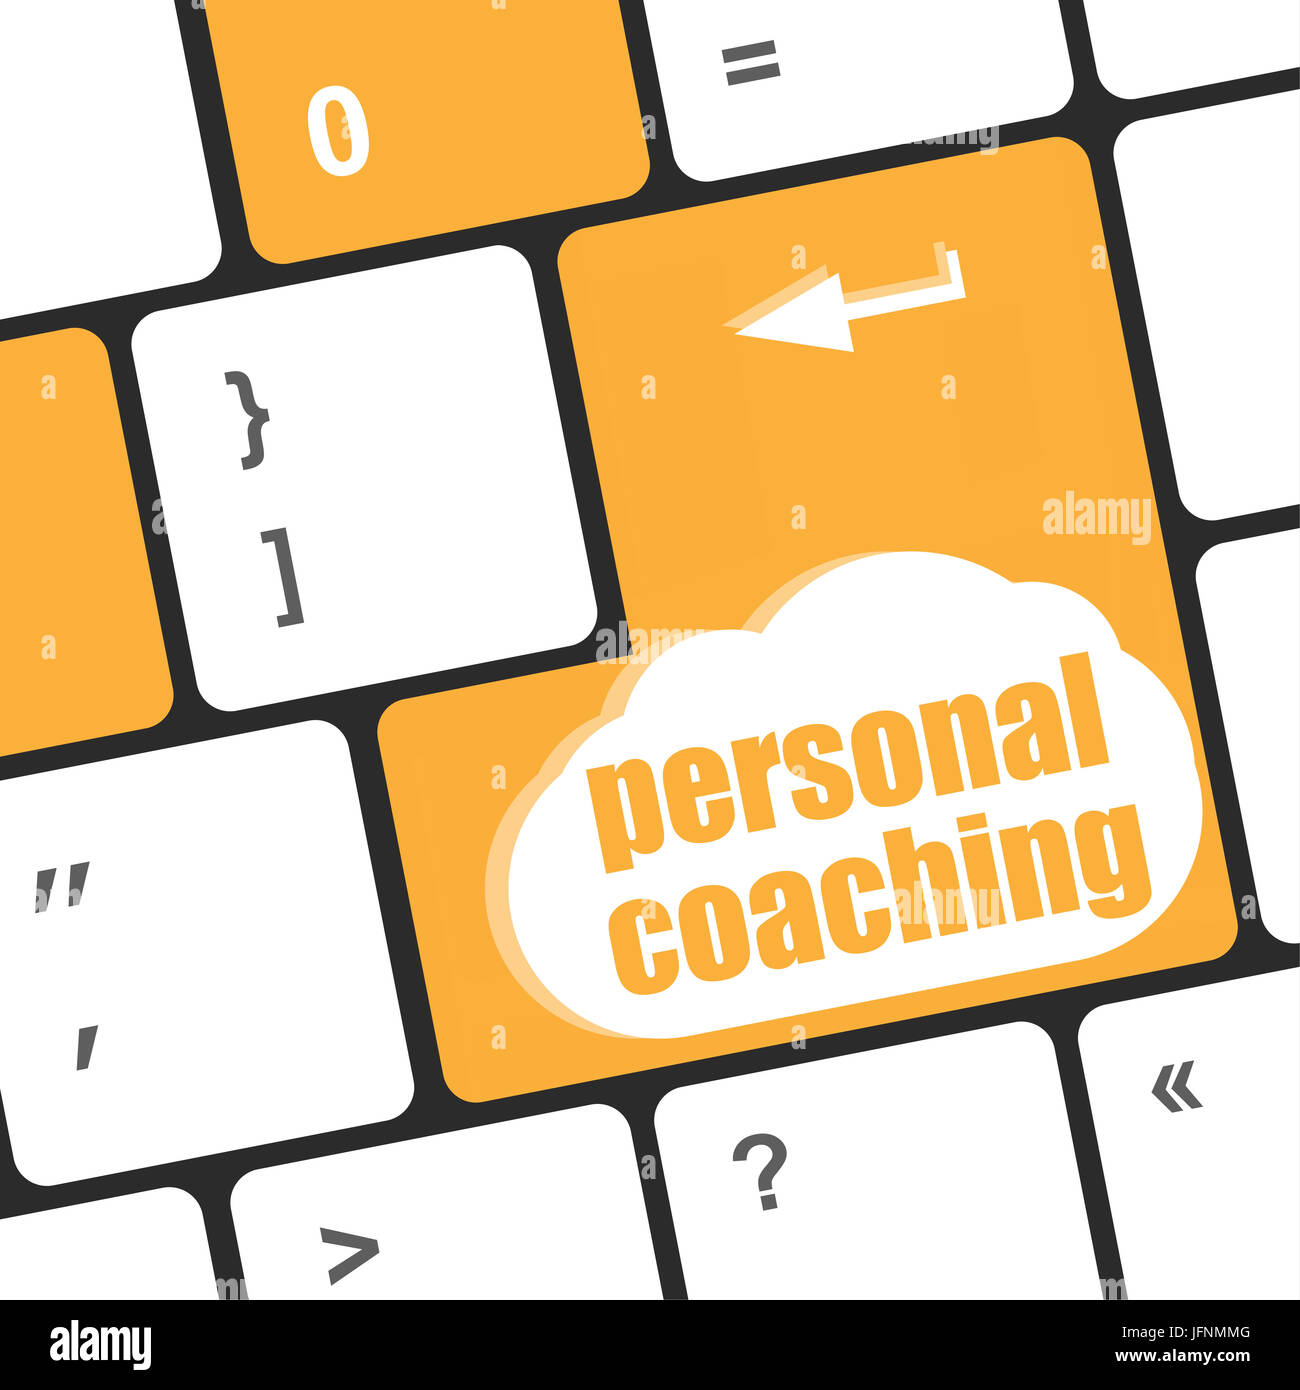 Keyboard key with enter button personal coaching Stock Photo